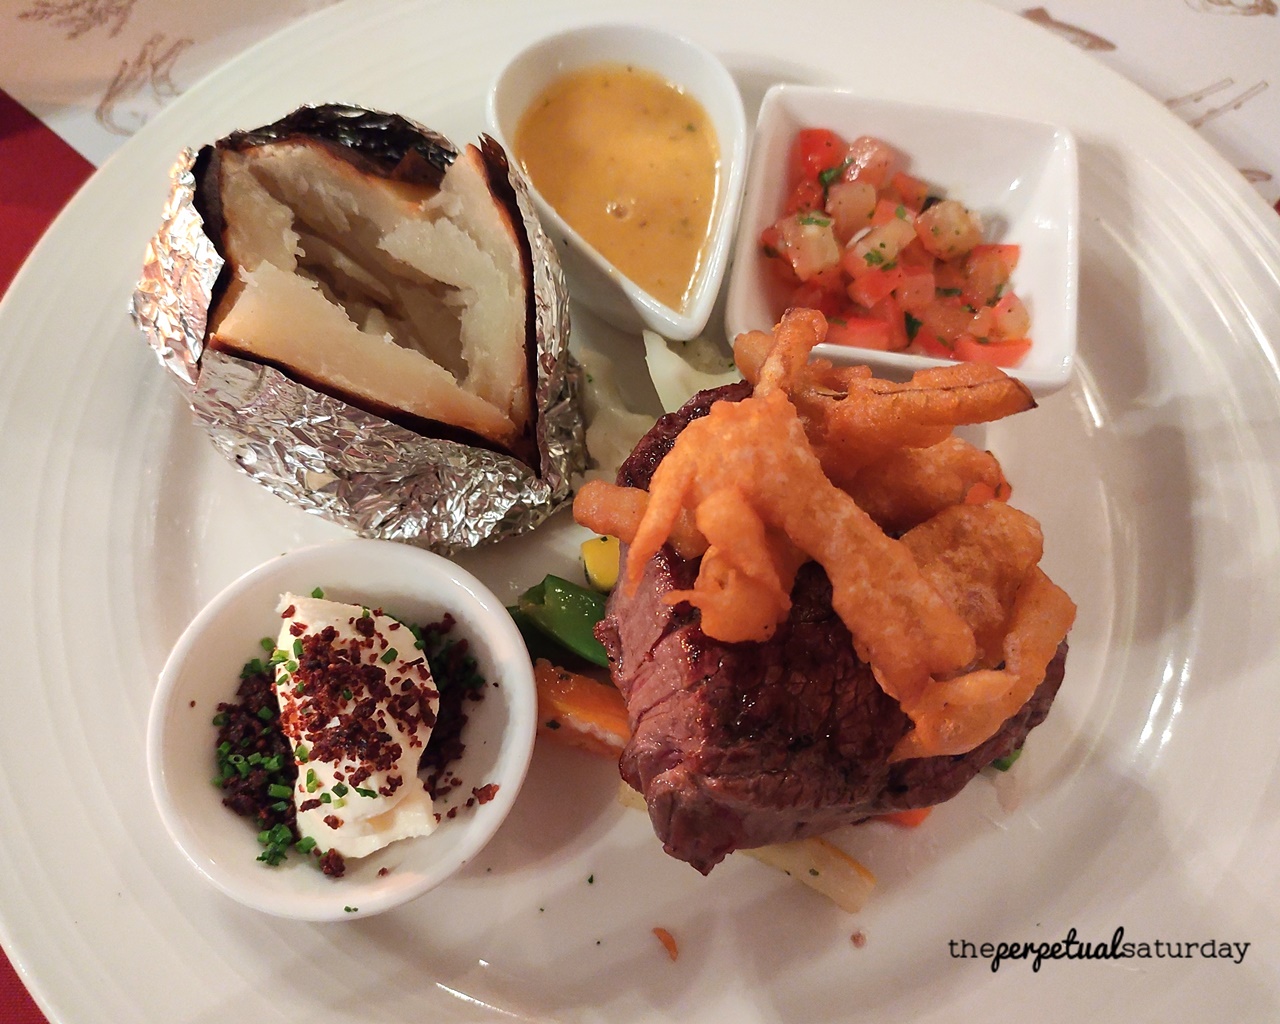 Steaks at The Steakhouse KL, review of The Steakhouse Bukit Bintang